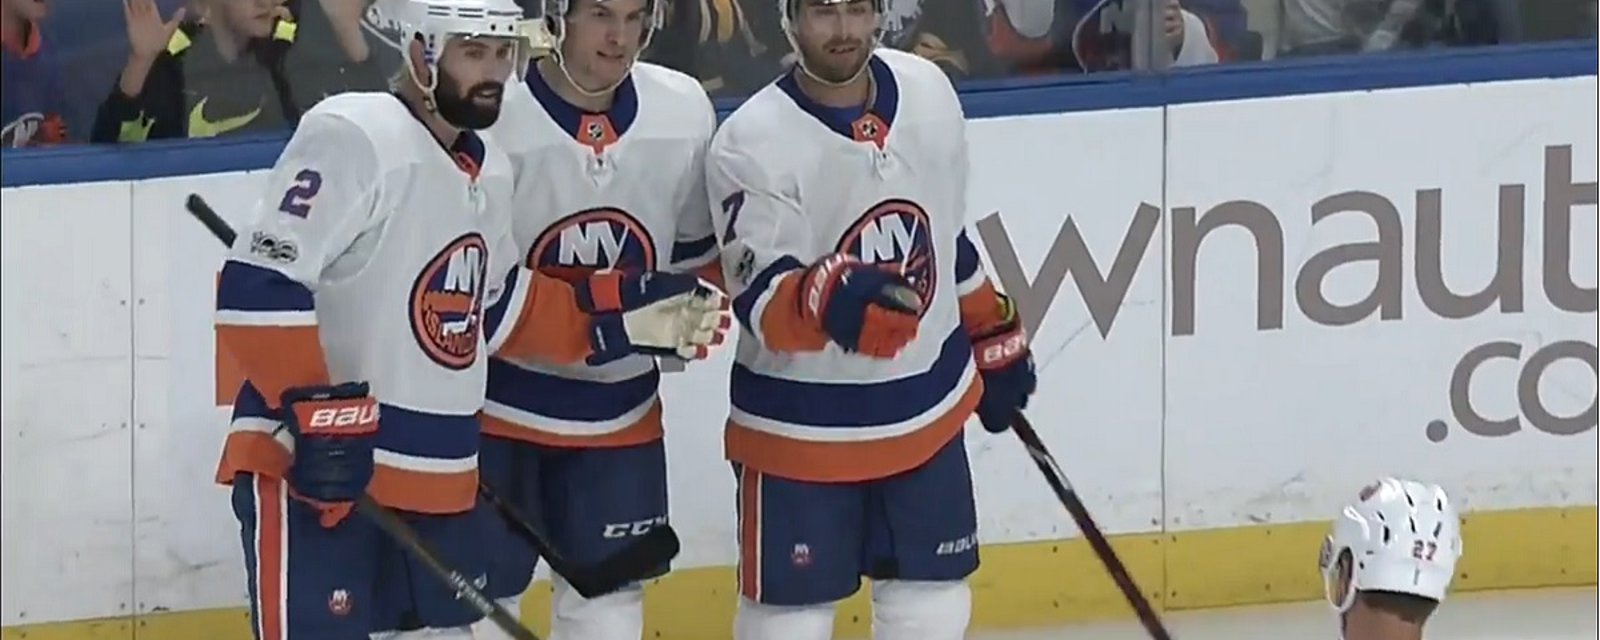 Eberle goes between the legs and to the backhand for his first as an Islander.